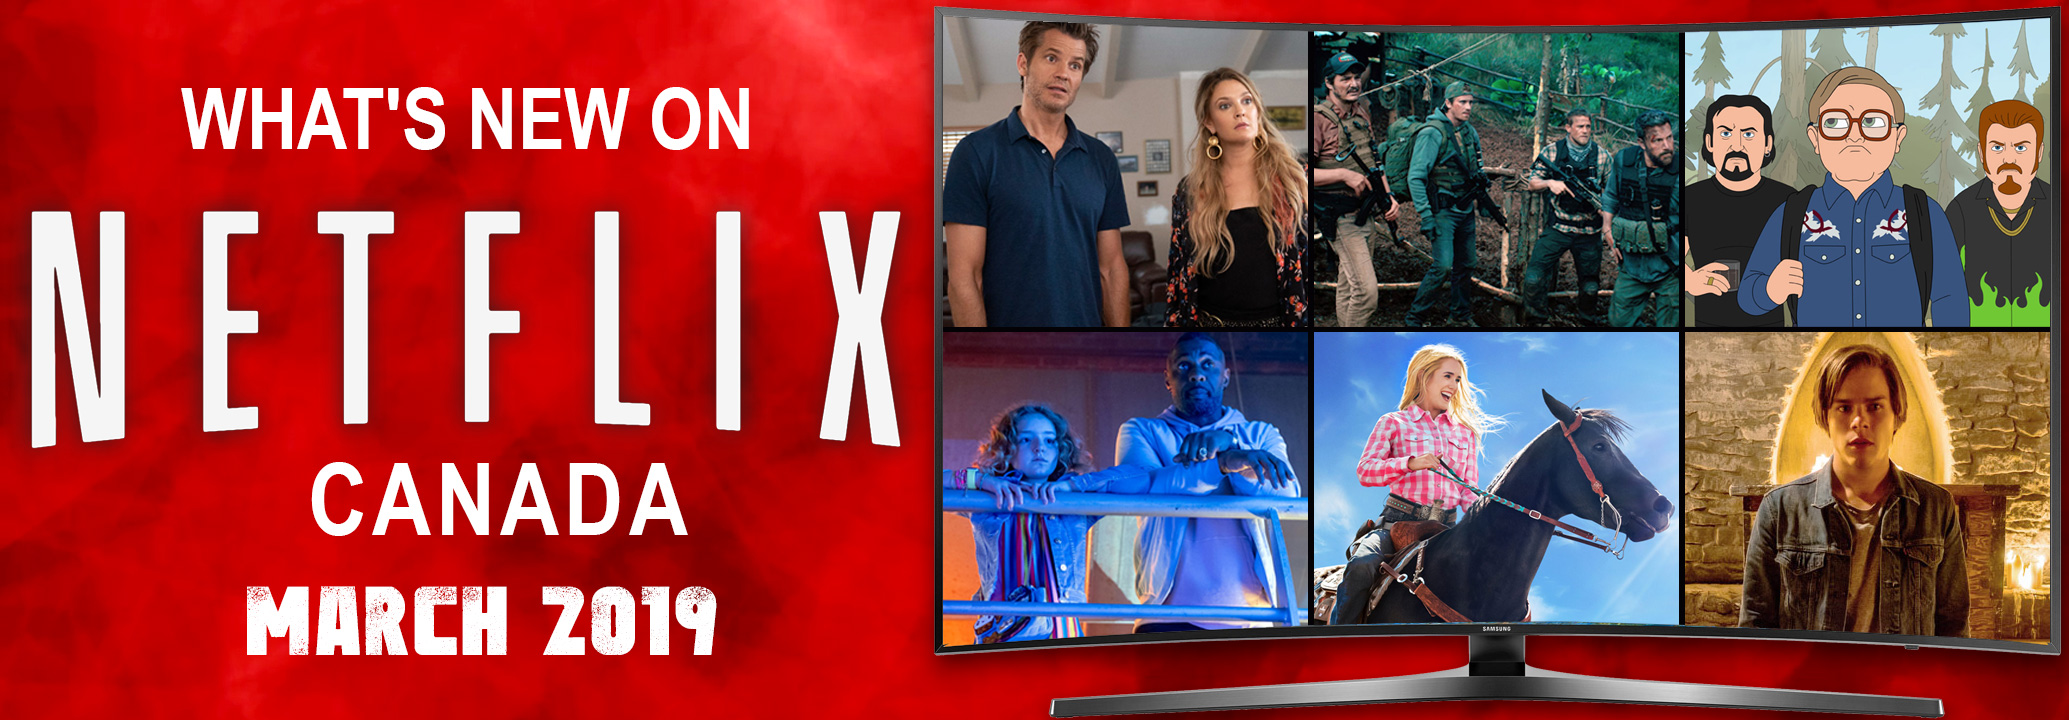 What's New on Netflix Canada March 2019